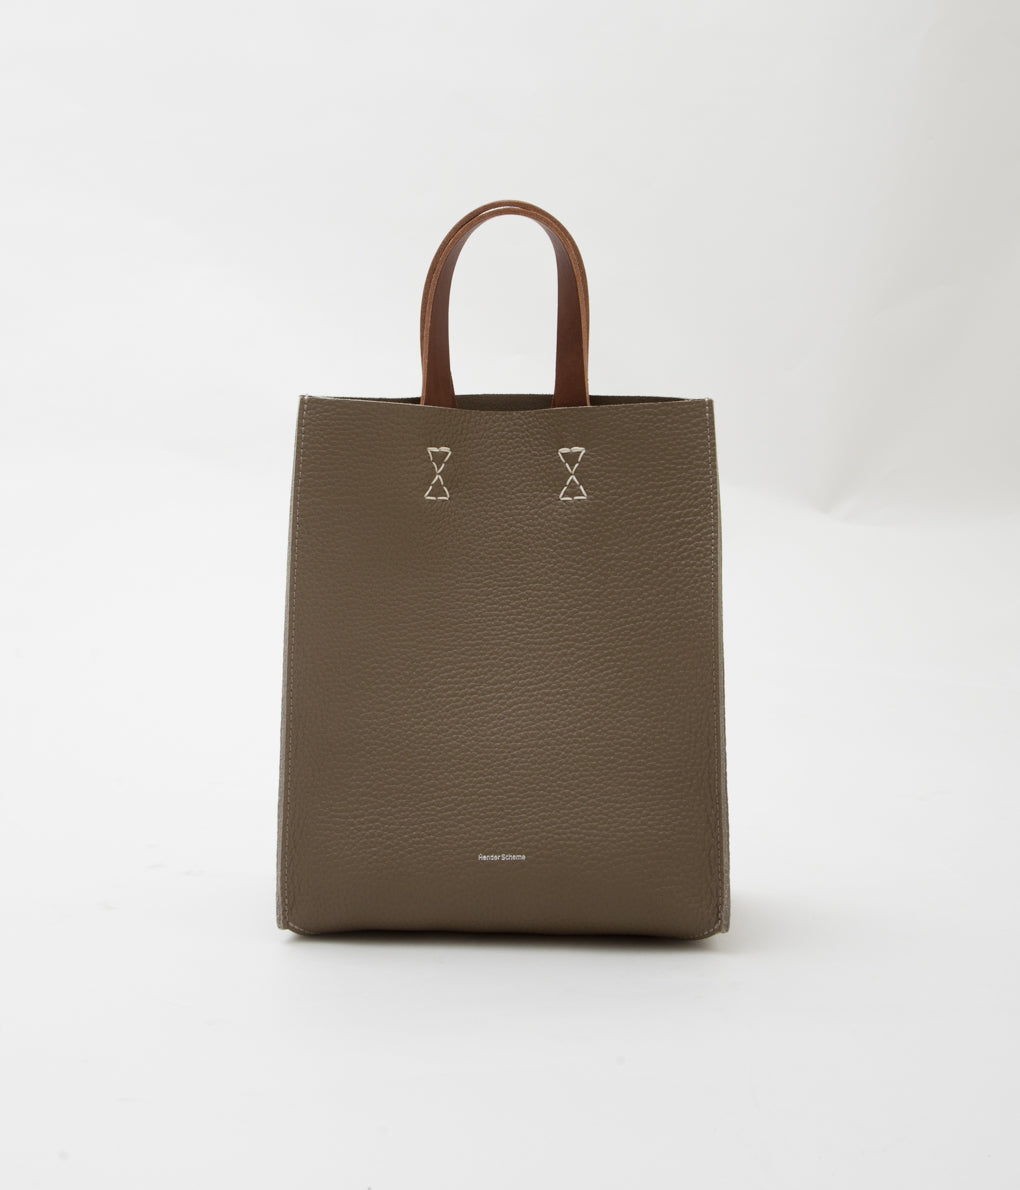 HENDER SCHEME "PAPER BAG SMALL"(TAUPE)